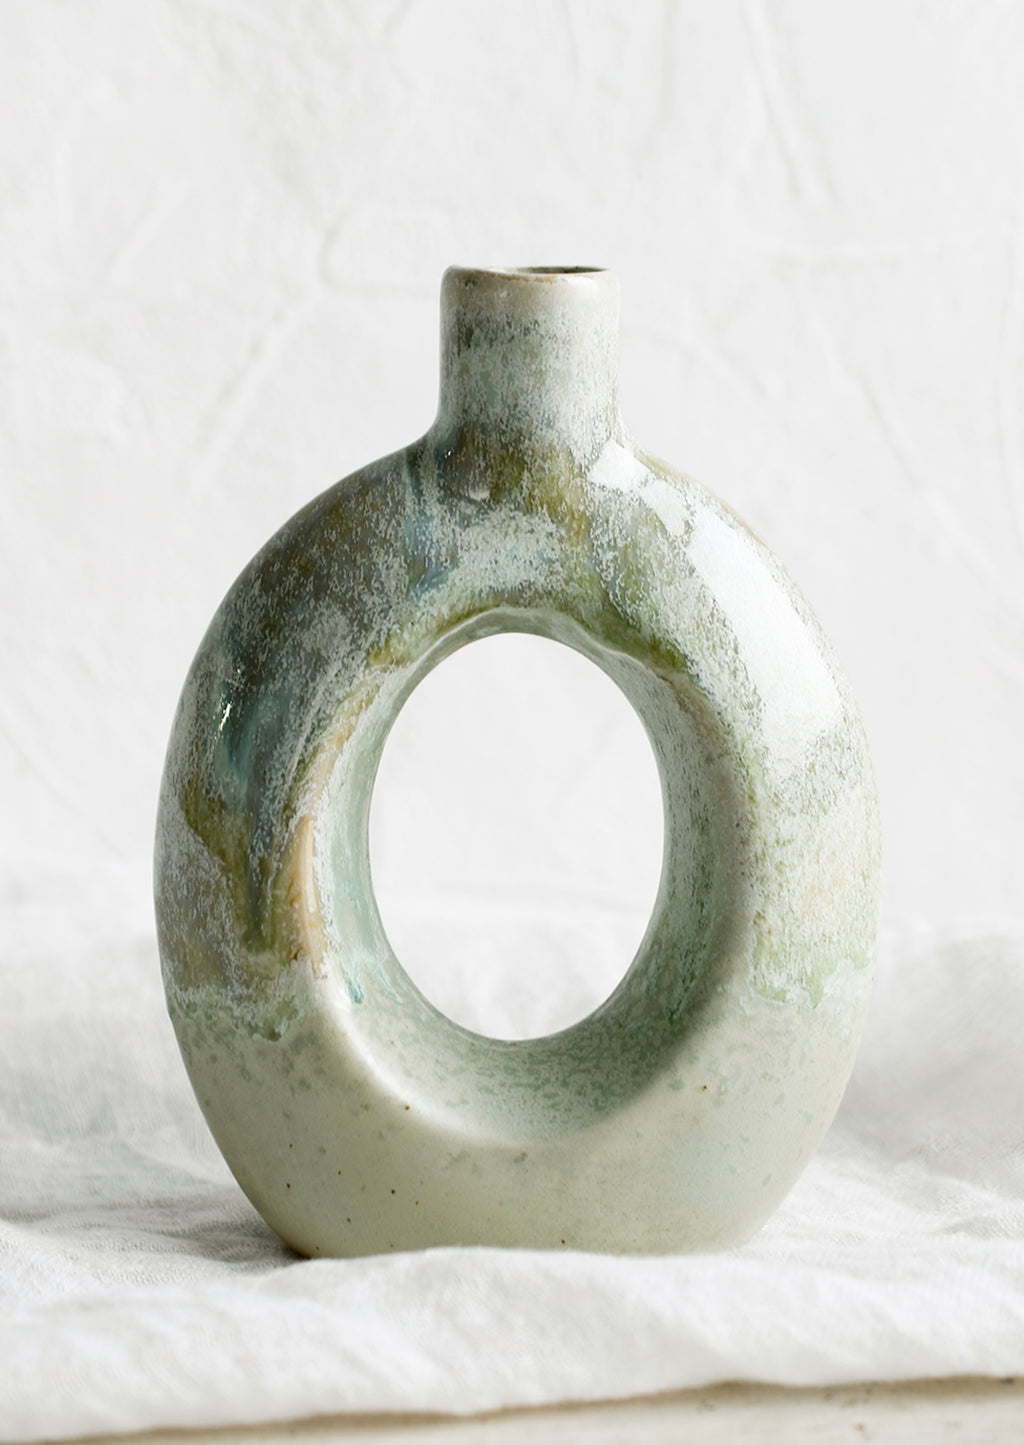 Oval: A ceramic vase in mottled aqua glaze with hollow oval shape.